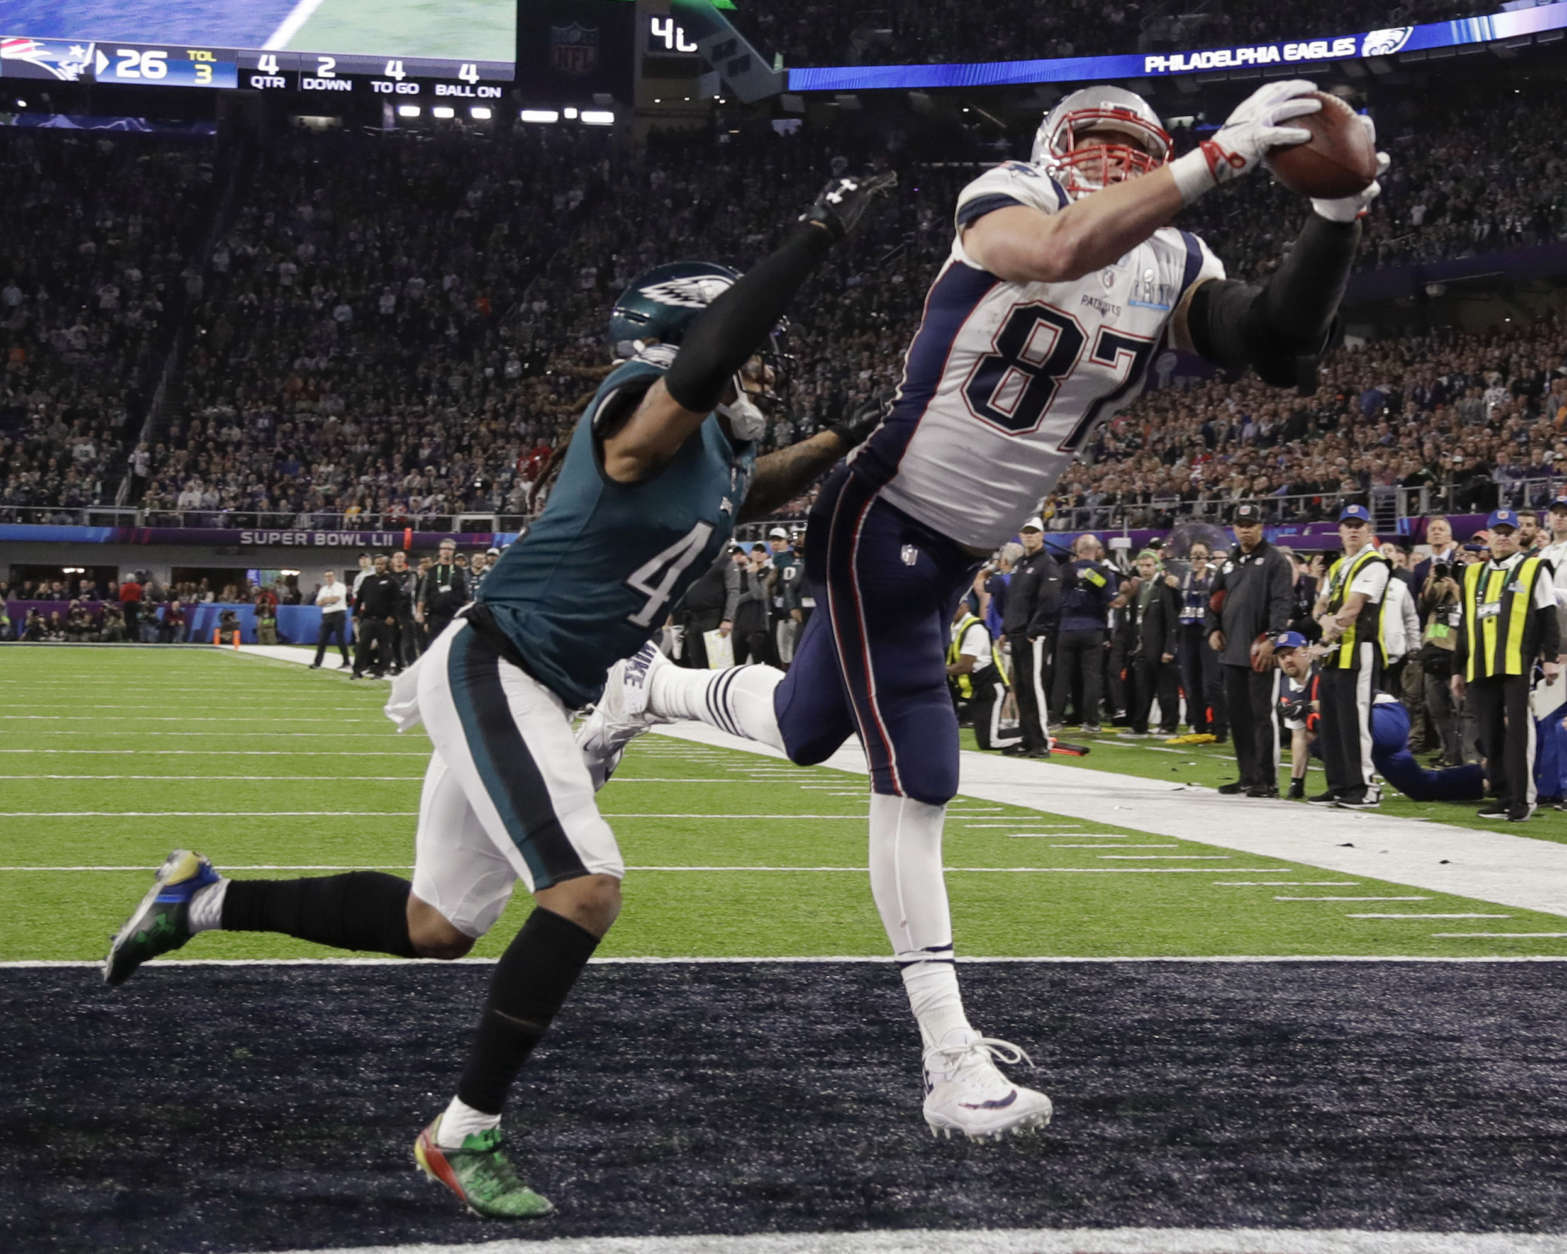 New England Patriots' Rob Gronkowski (87) makes a touchdown reception against Philadelphia Eagles cornerback Ronald Darby (41), during the second half of the NFL Super Bowl 52 football game, Sunday, Feb. 4, 2018, in Minneapolis. (AP Photo/Chris O'Meara)